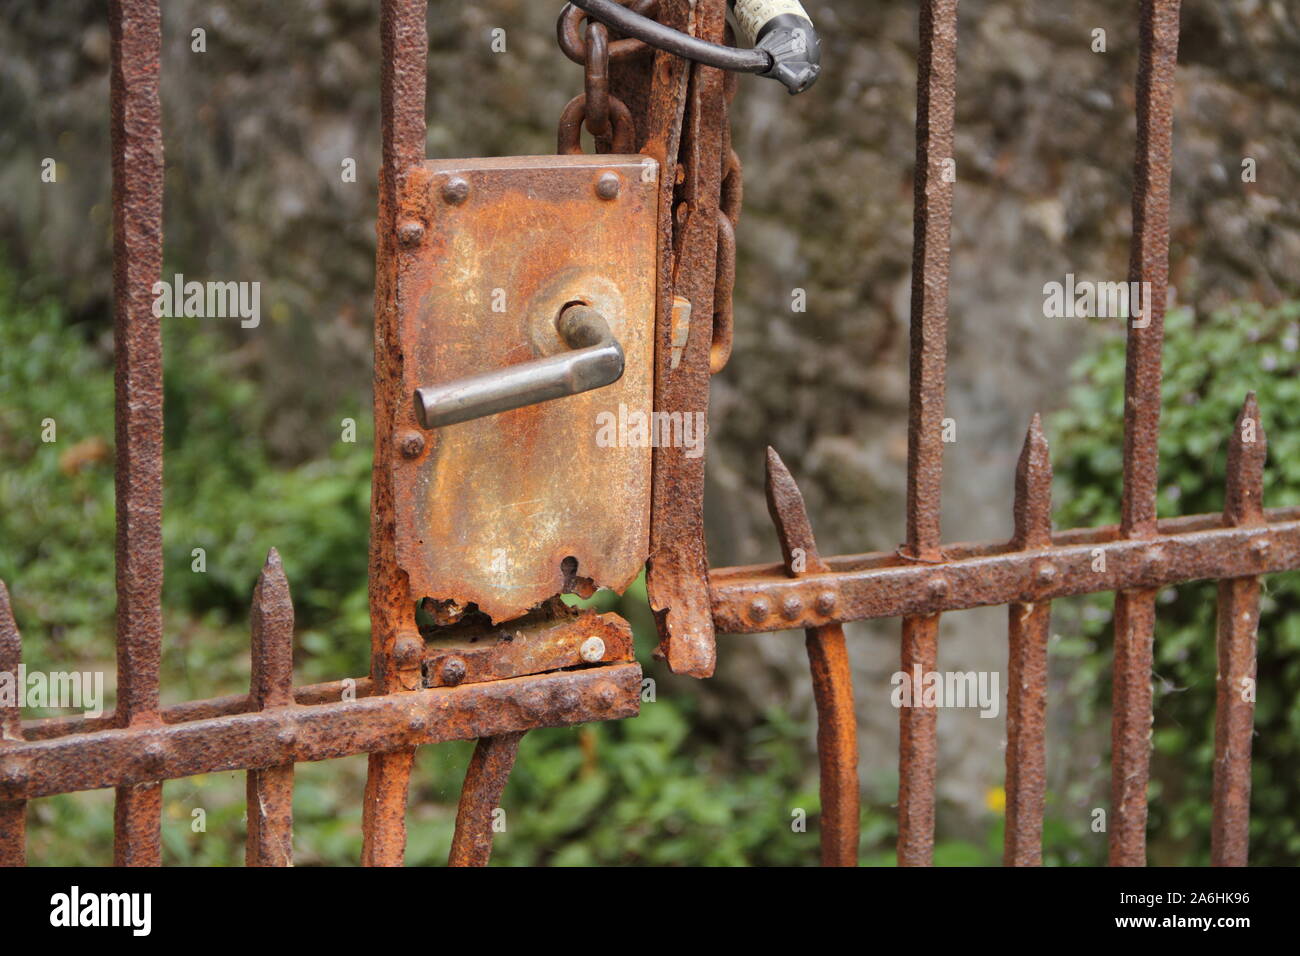 Broken Iron Gate High Resolution Stock Photography and Images - Alamy